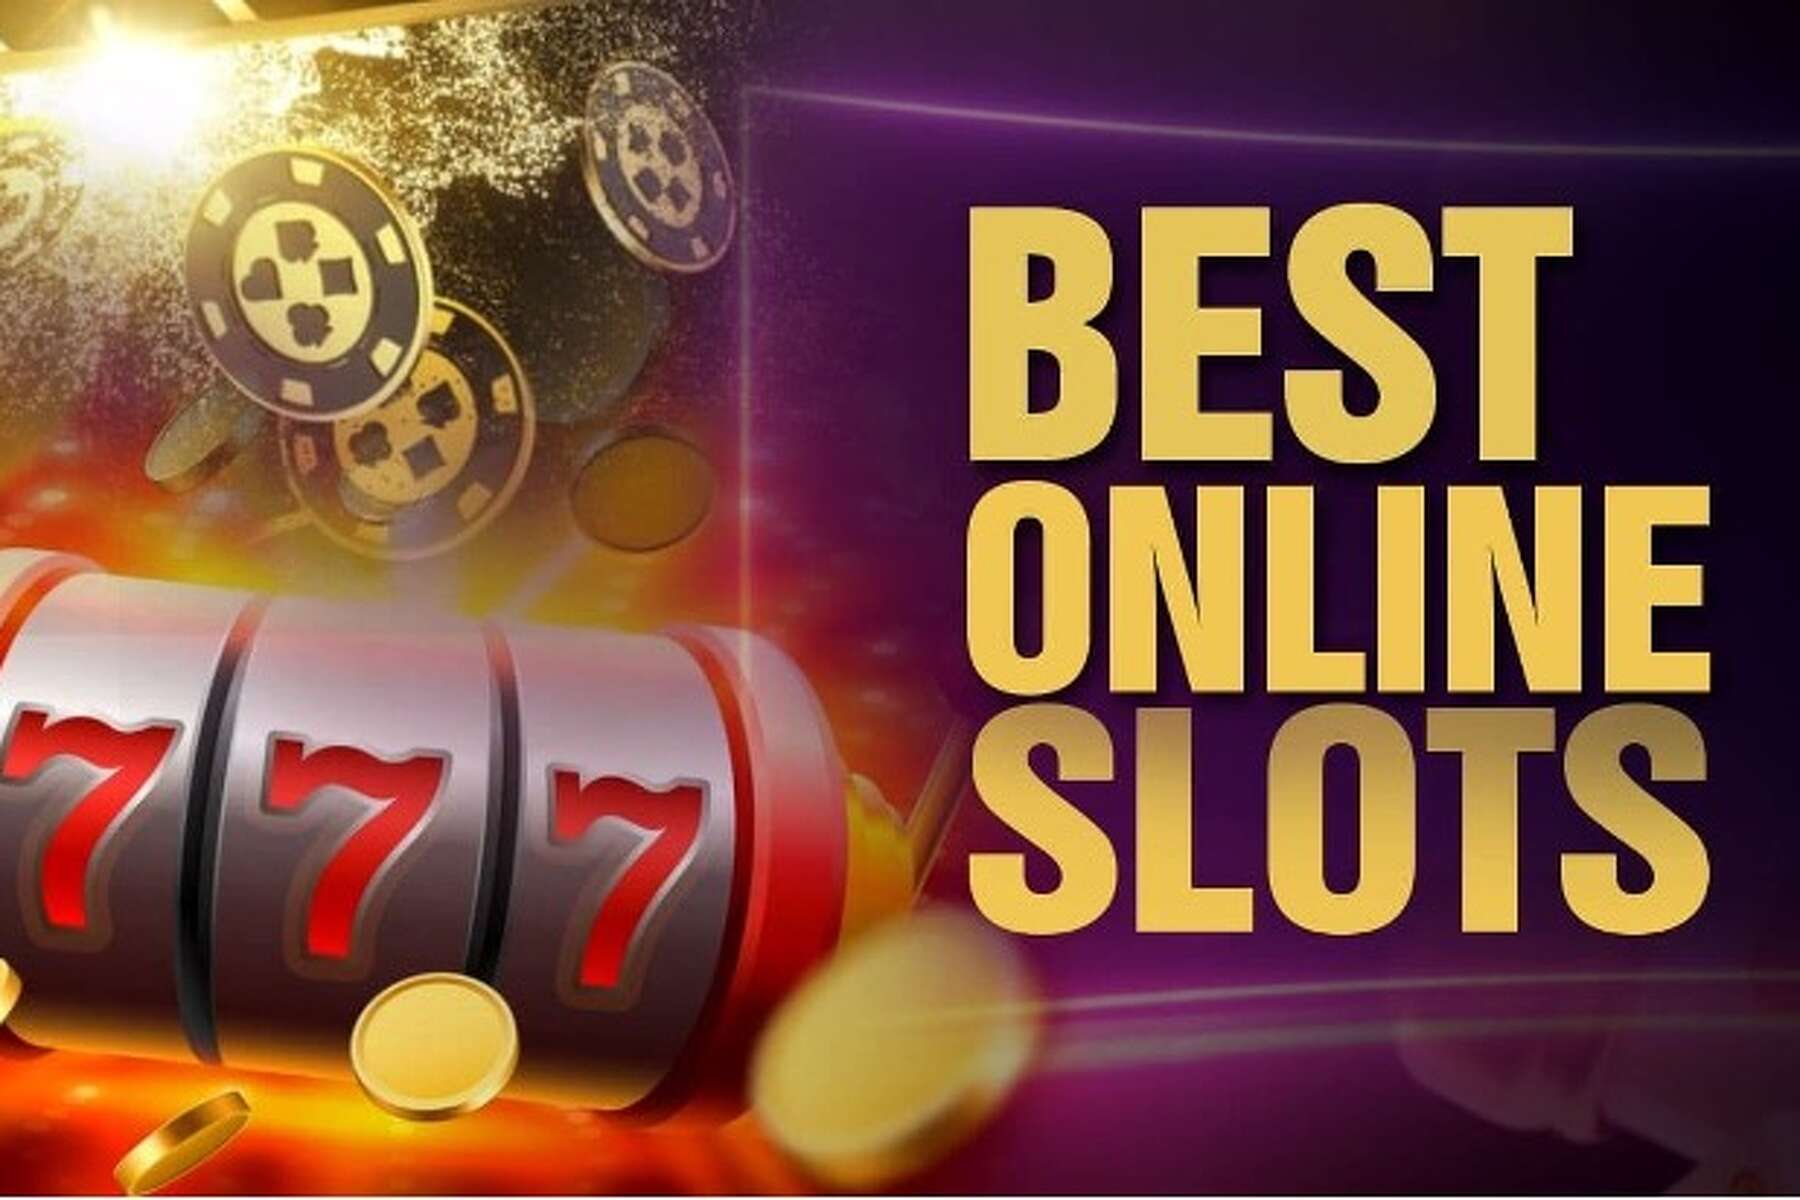 Best Online Casino Games That Payout